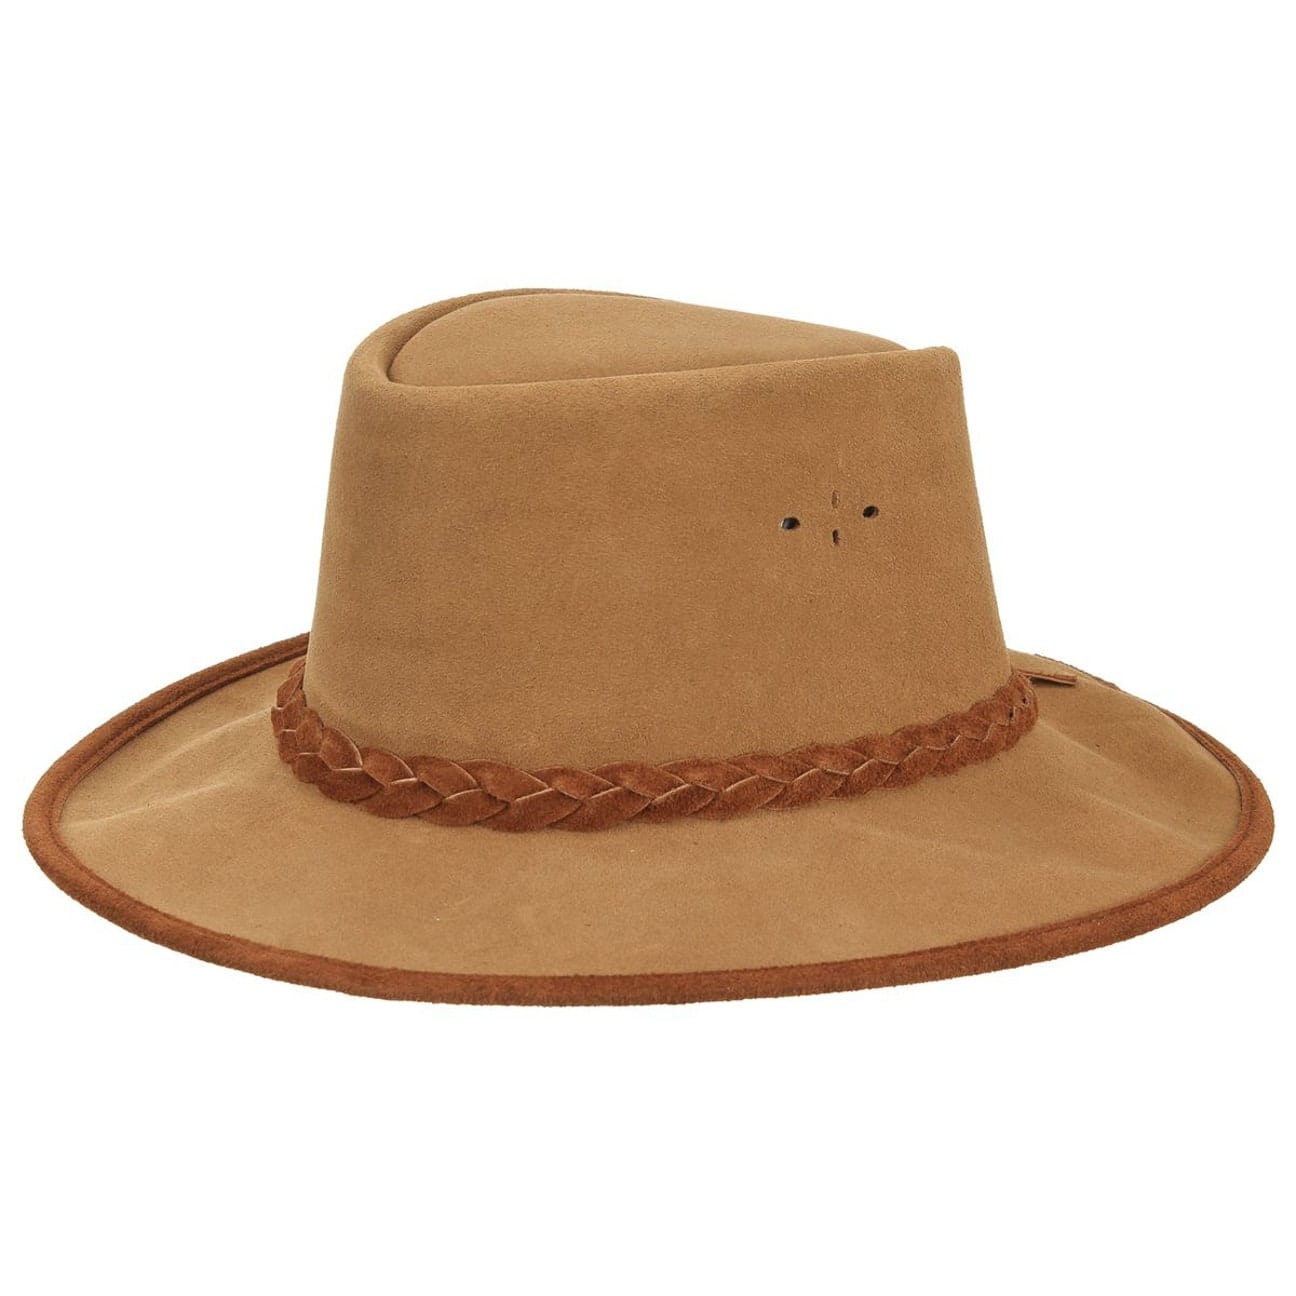 Stockman Australian Leather Hat by BC HATS - 64,95